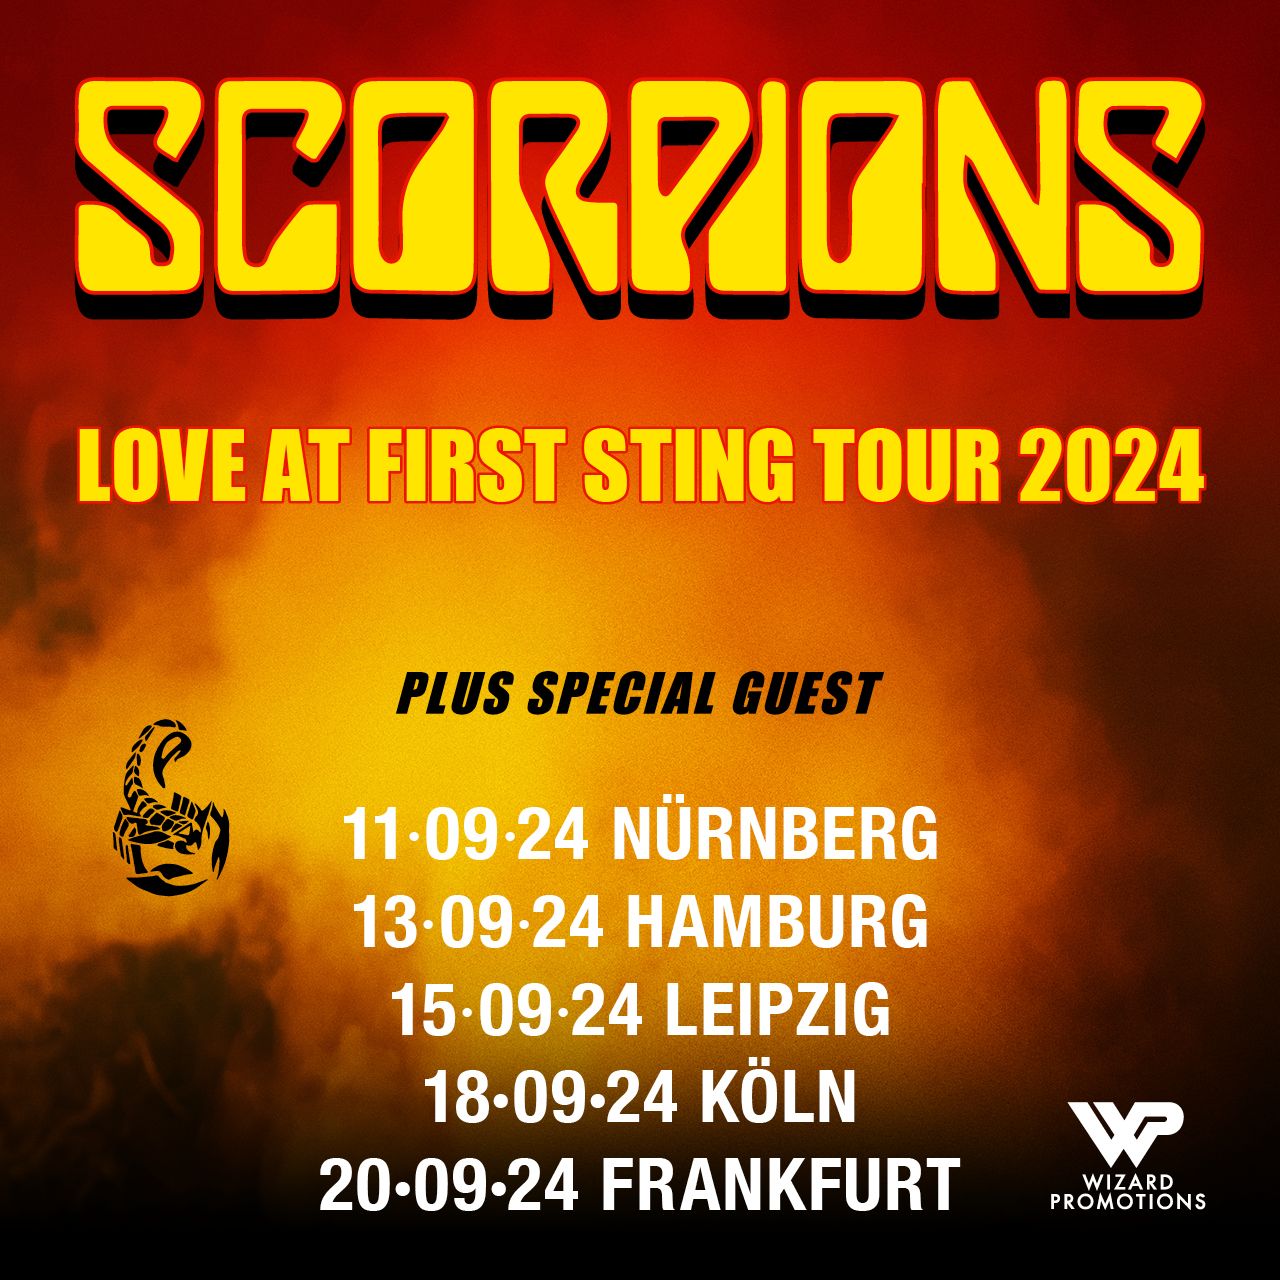 Scorpions - "Love At First Sting"-Tour 2024